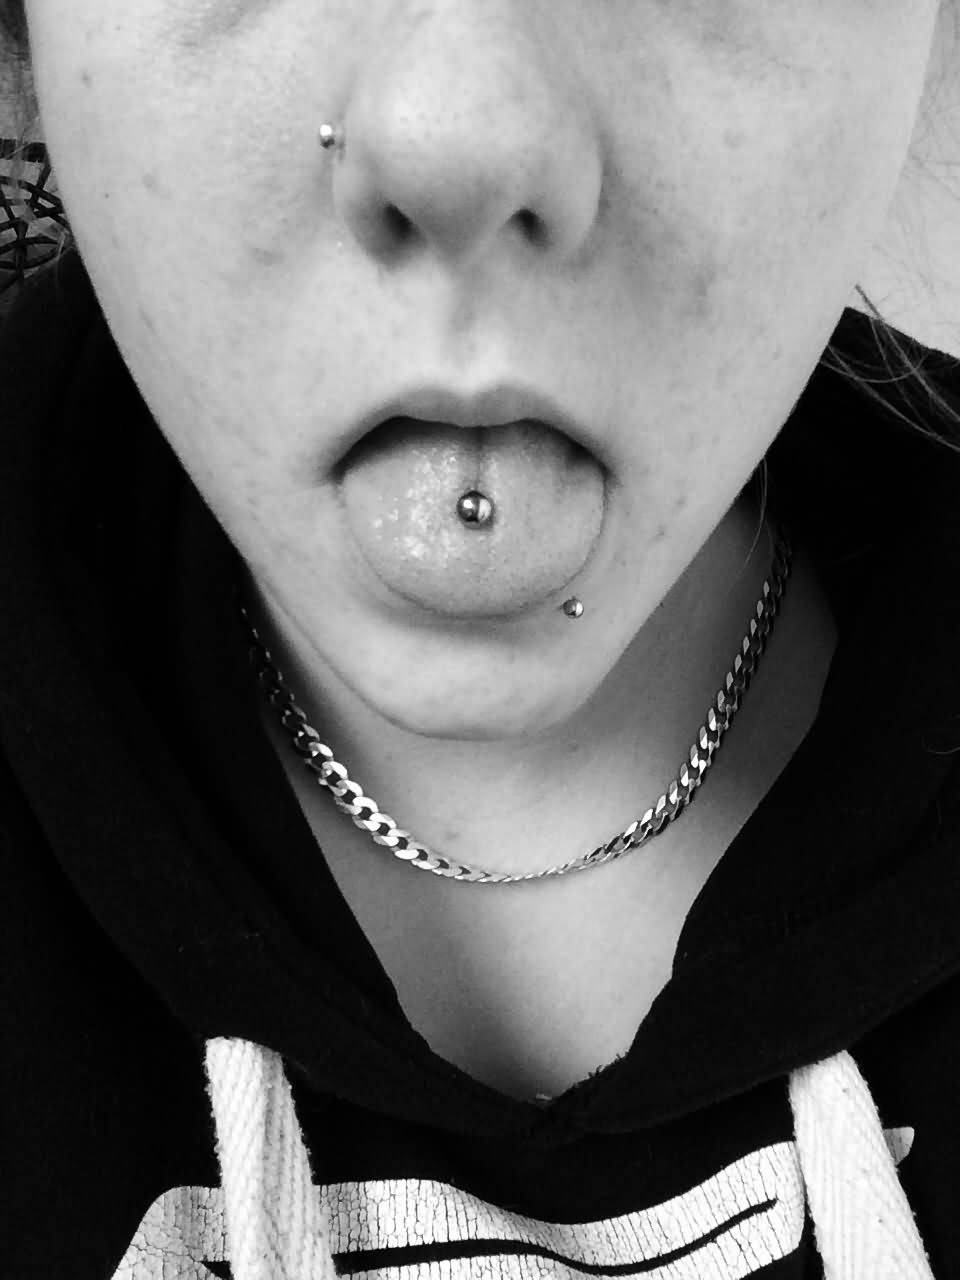 Right Nostril, Lip and Tongue Piercing | Piercing Time